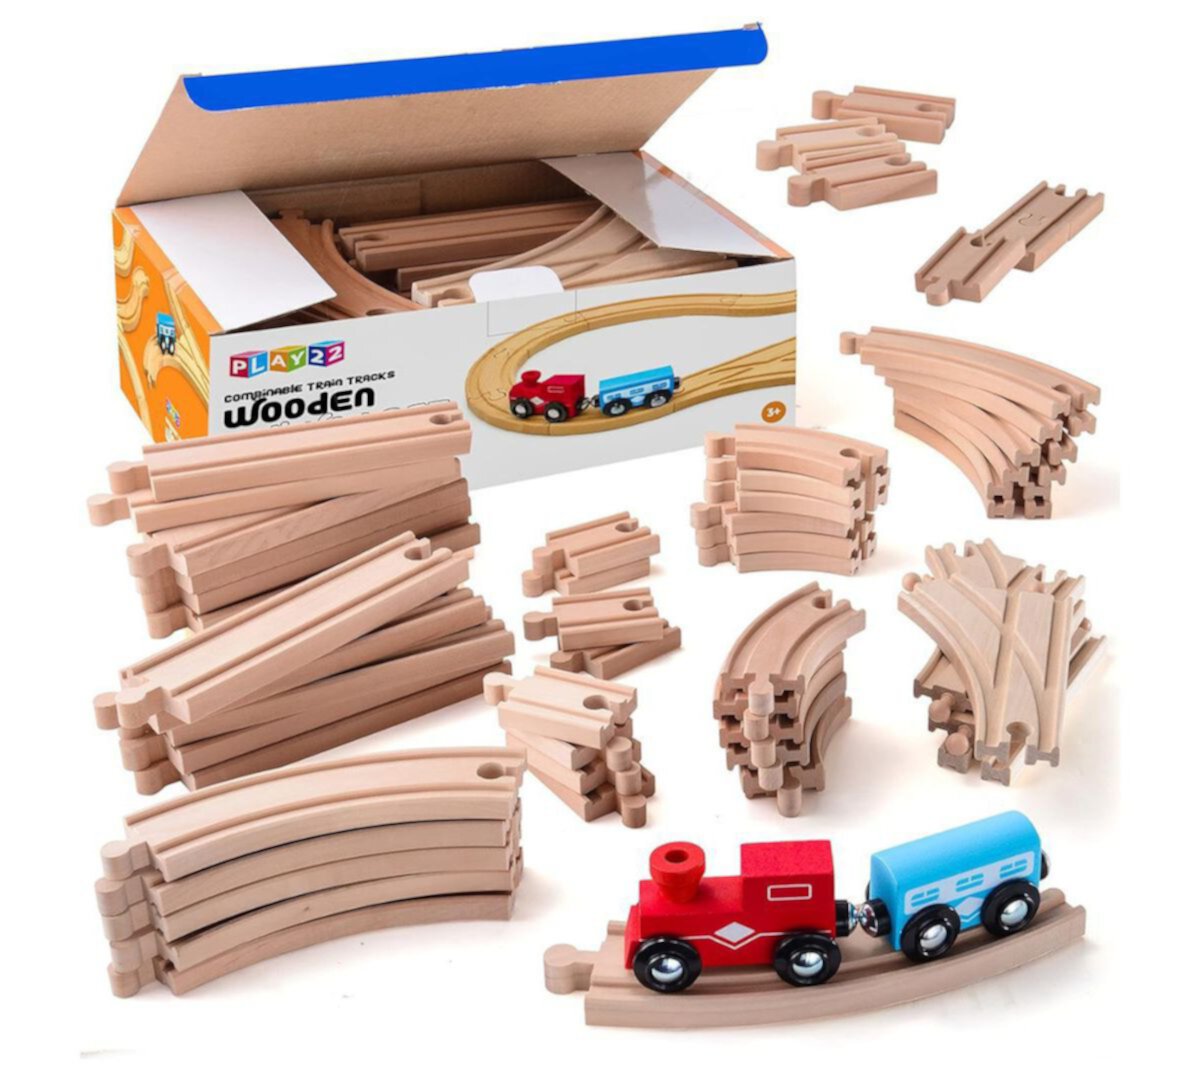 52 PCS Wooden Train Tracks Set + Toy Trains - Wooden Train Sets for Kids Play22